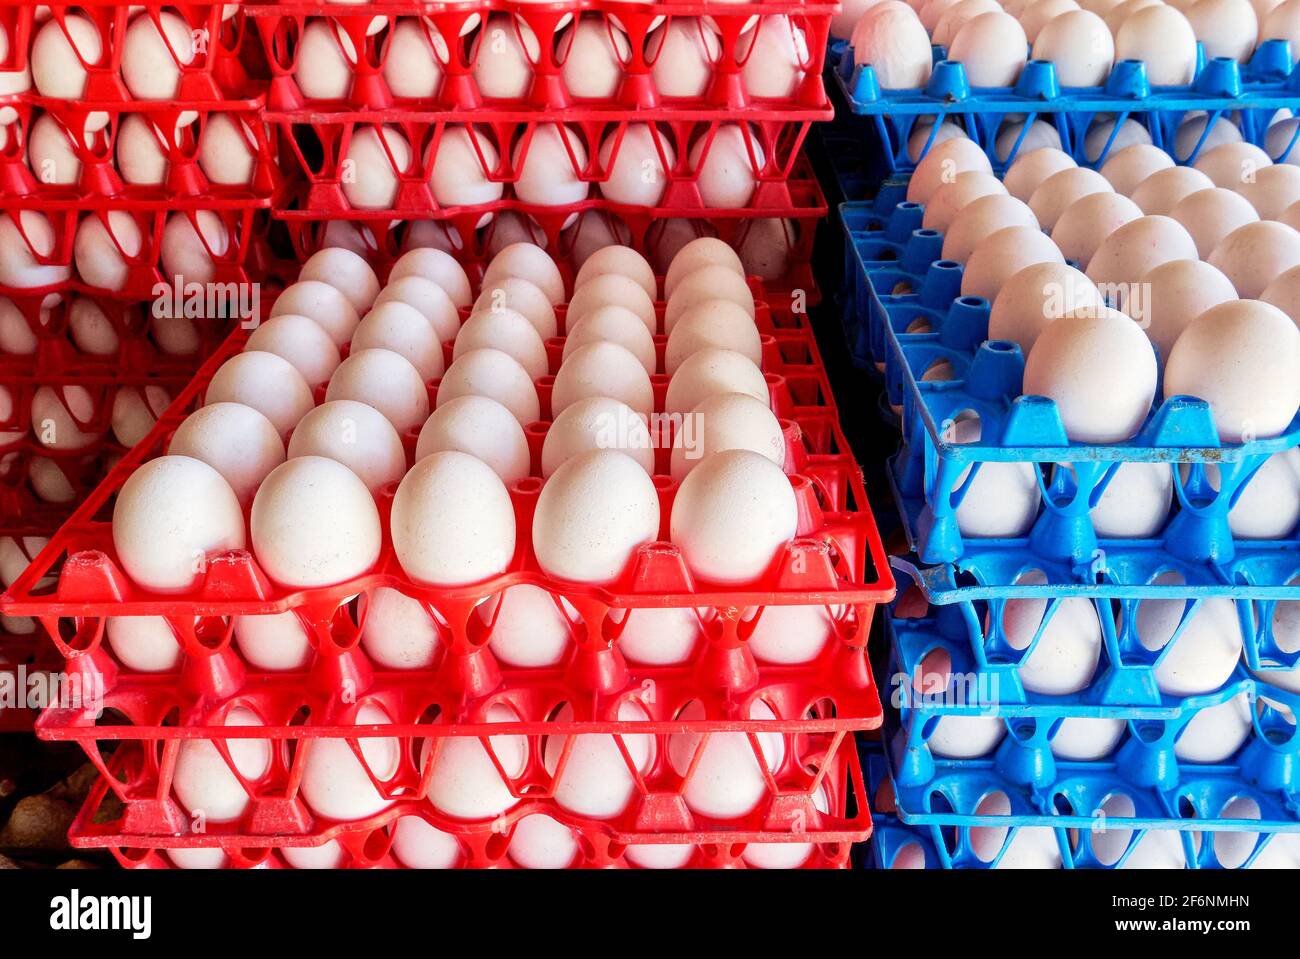 Close-up of colorful red and blue plastic trays filled with white chicken eggs, for sale at a market stall in the Philippines, Asia Stock Photo